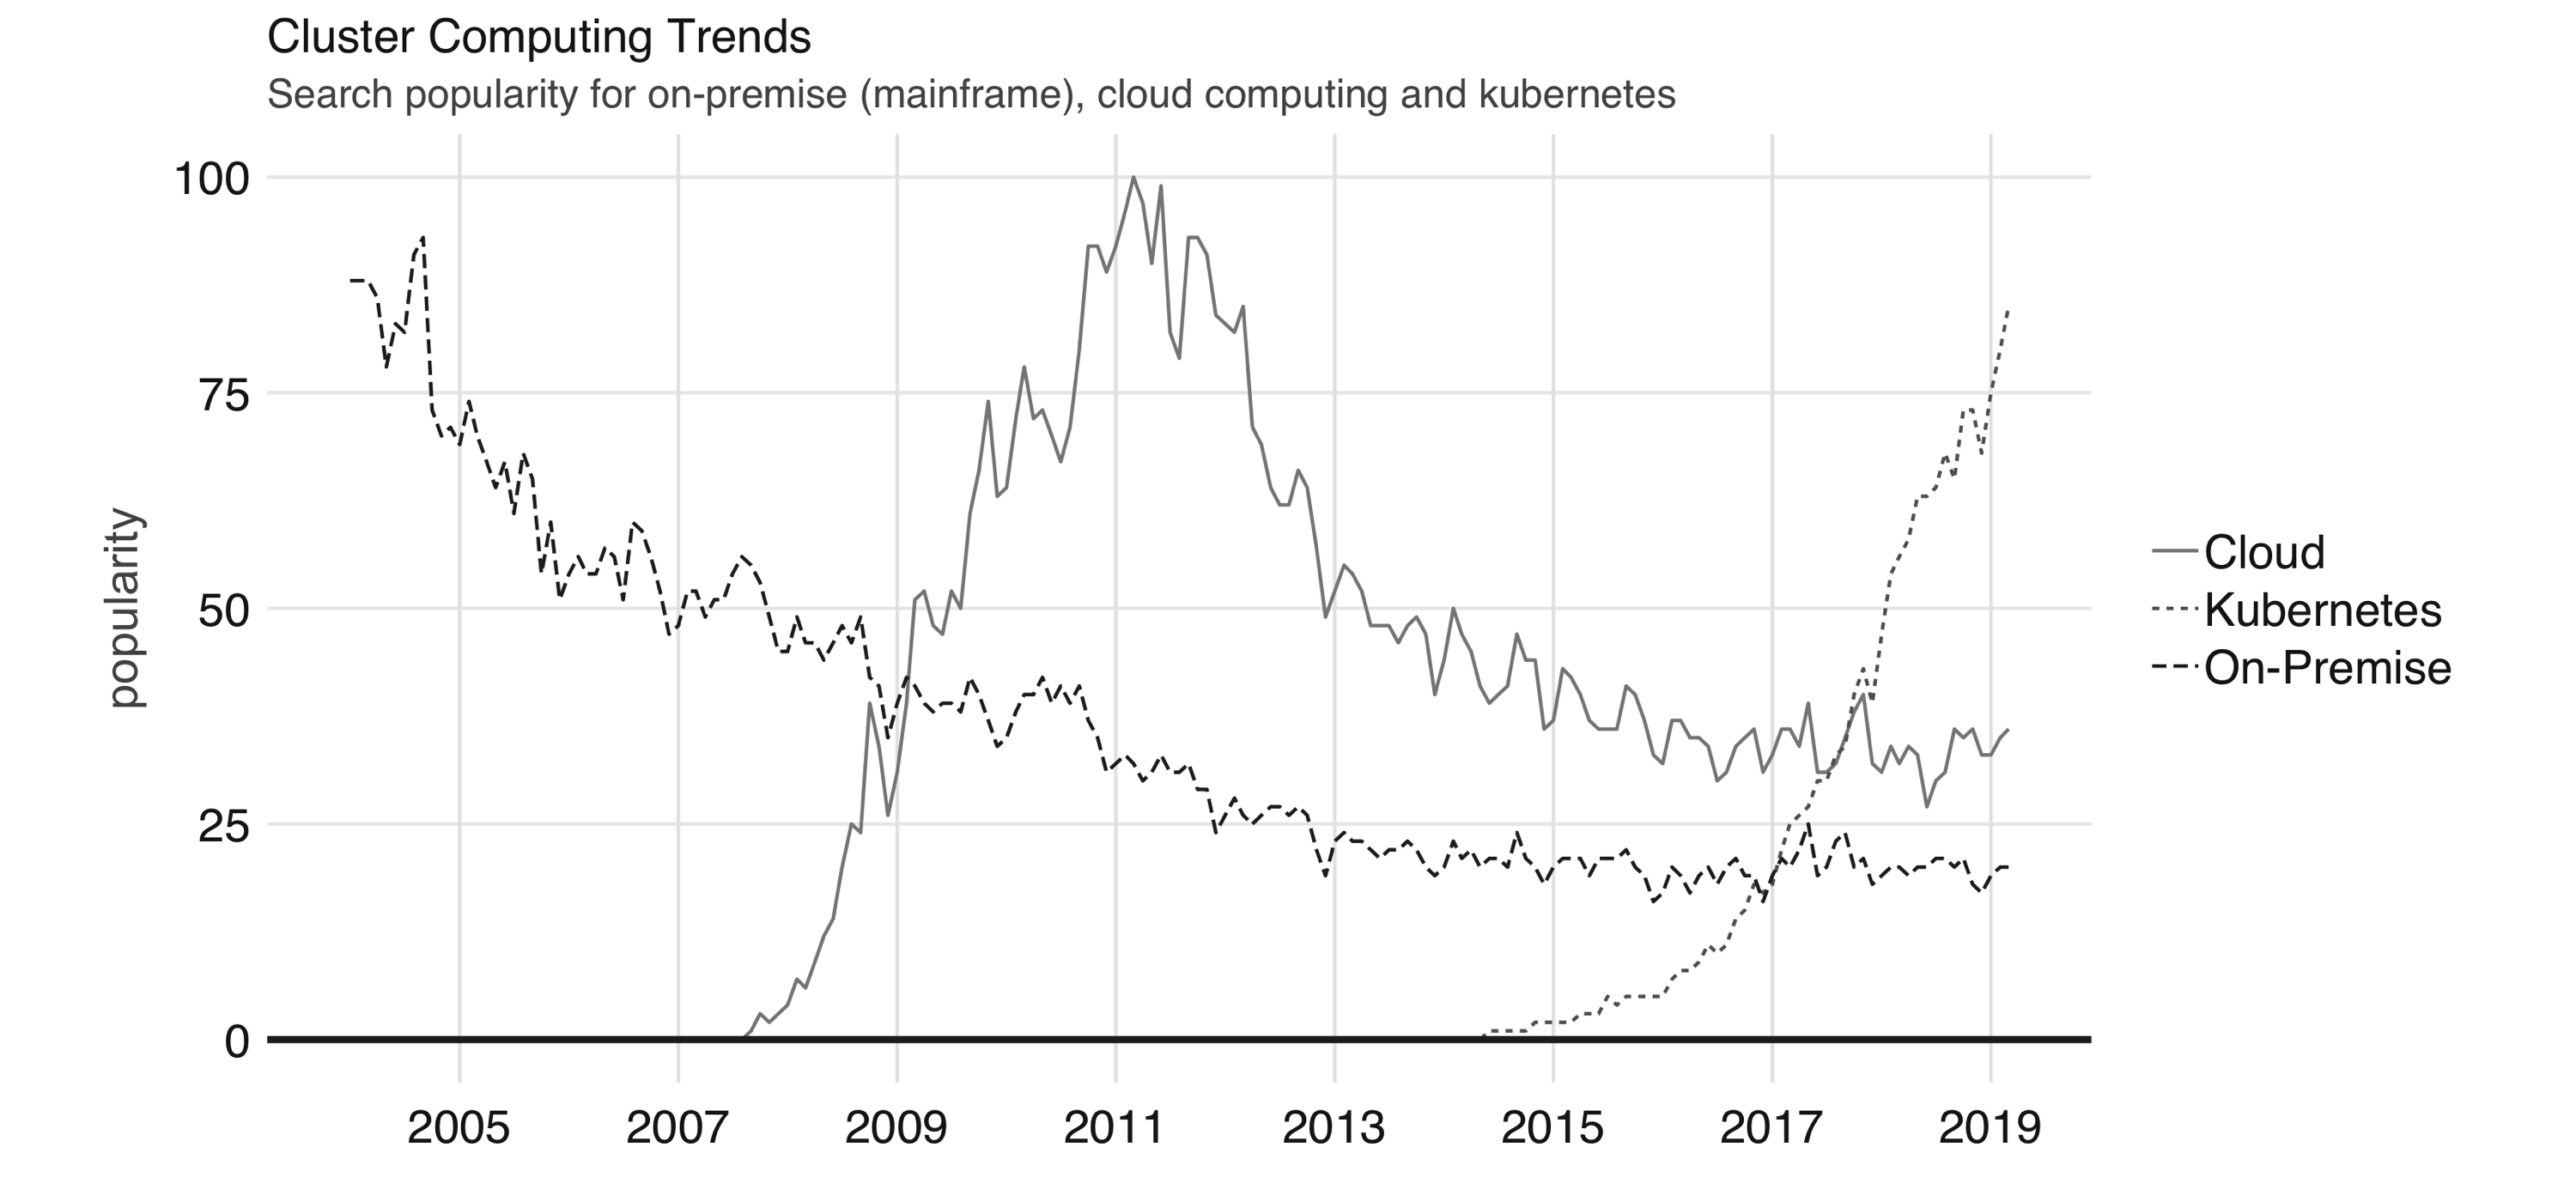 Google trends for on-premises (mainframe), cloud computing, and Kubernetes